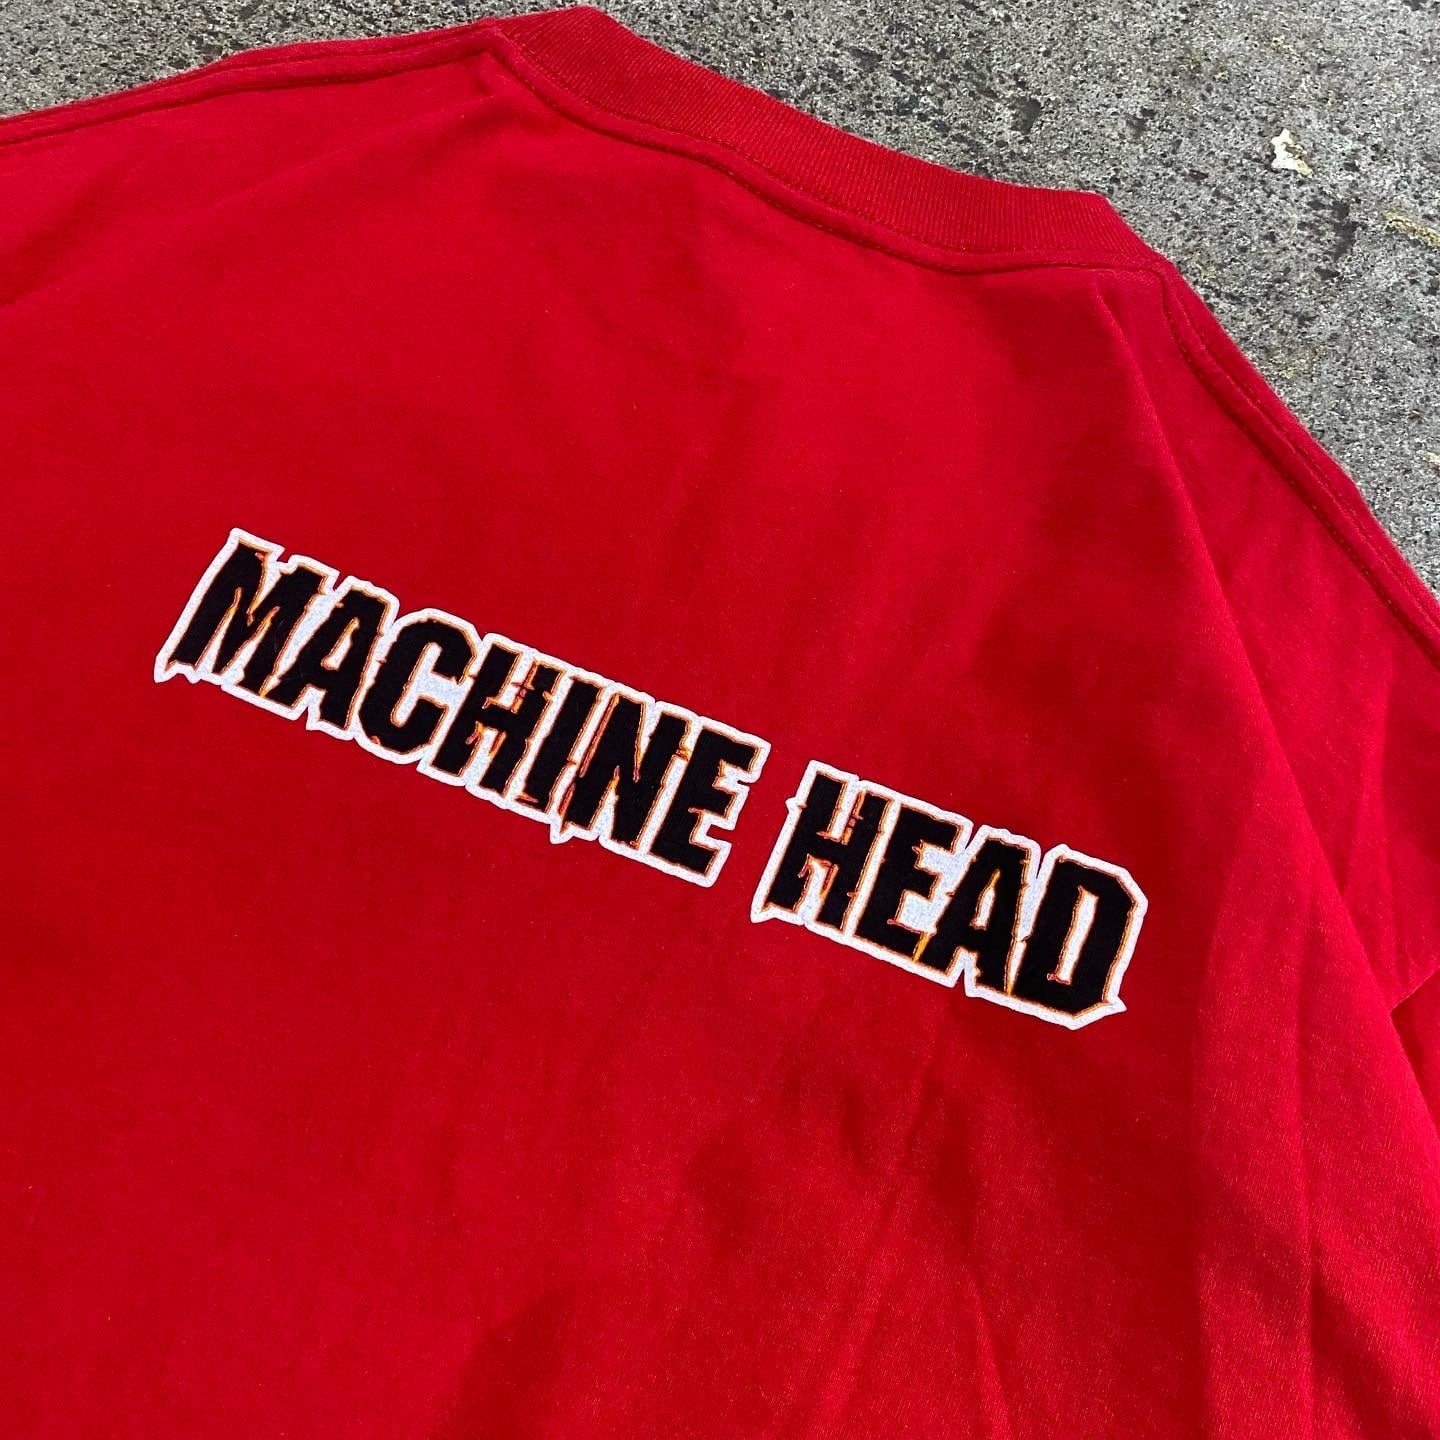 00s MACHINE HEAD T-shirt【仙台店】 | What’z up powered by BASE